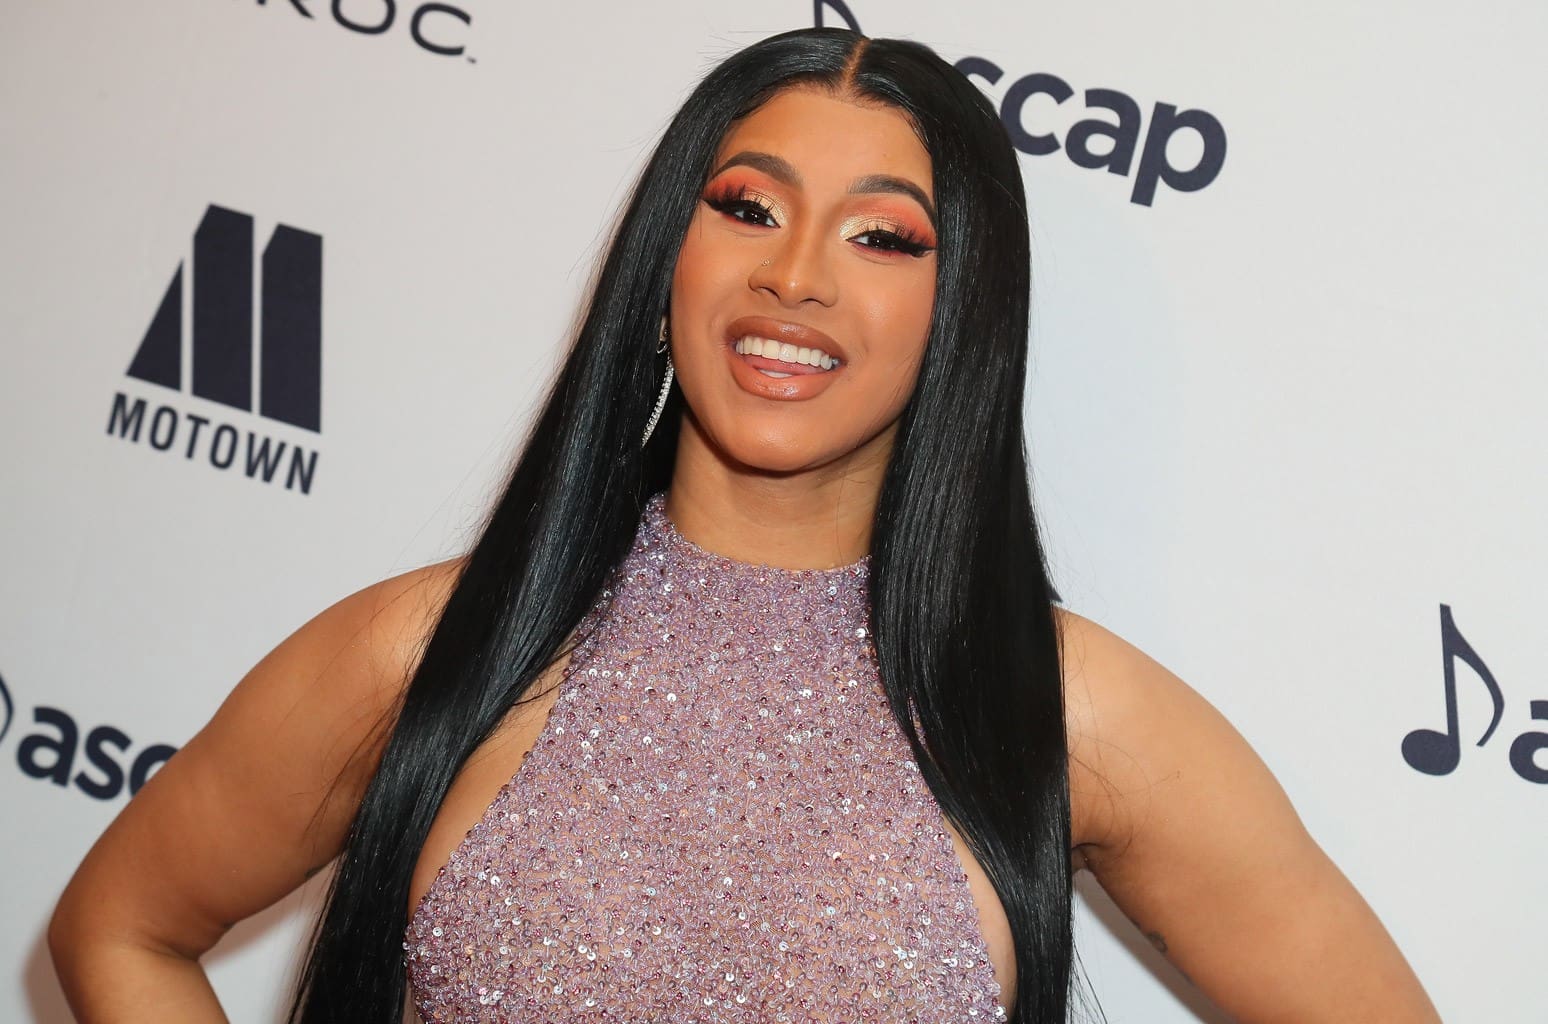 cardi-bs-latest-post-has-fans-in-awe-see-whats-this-all-about-here